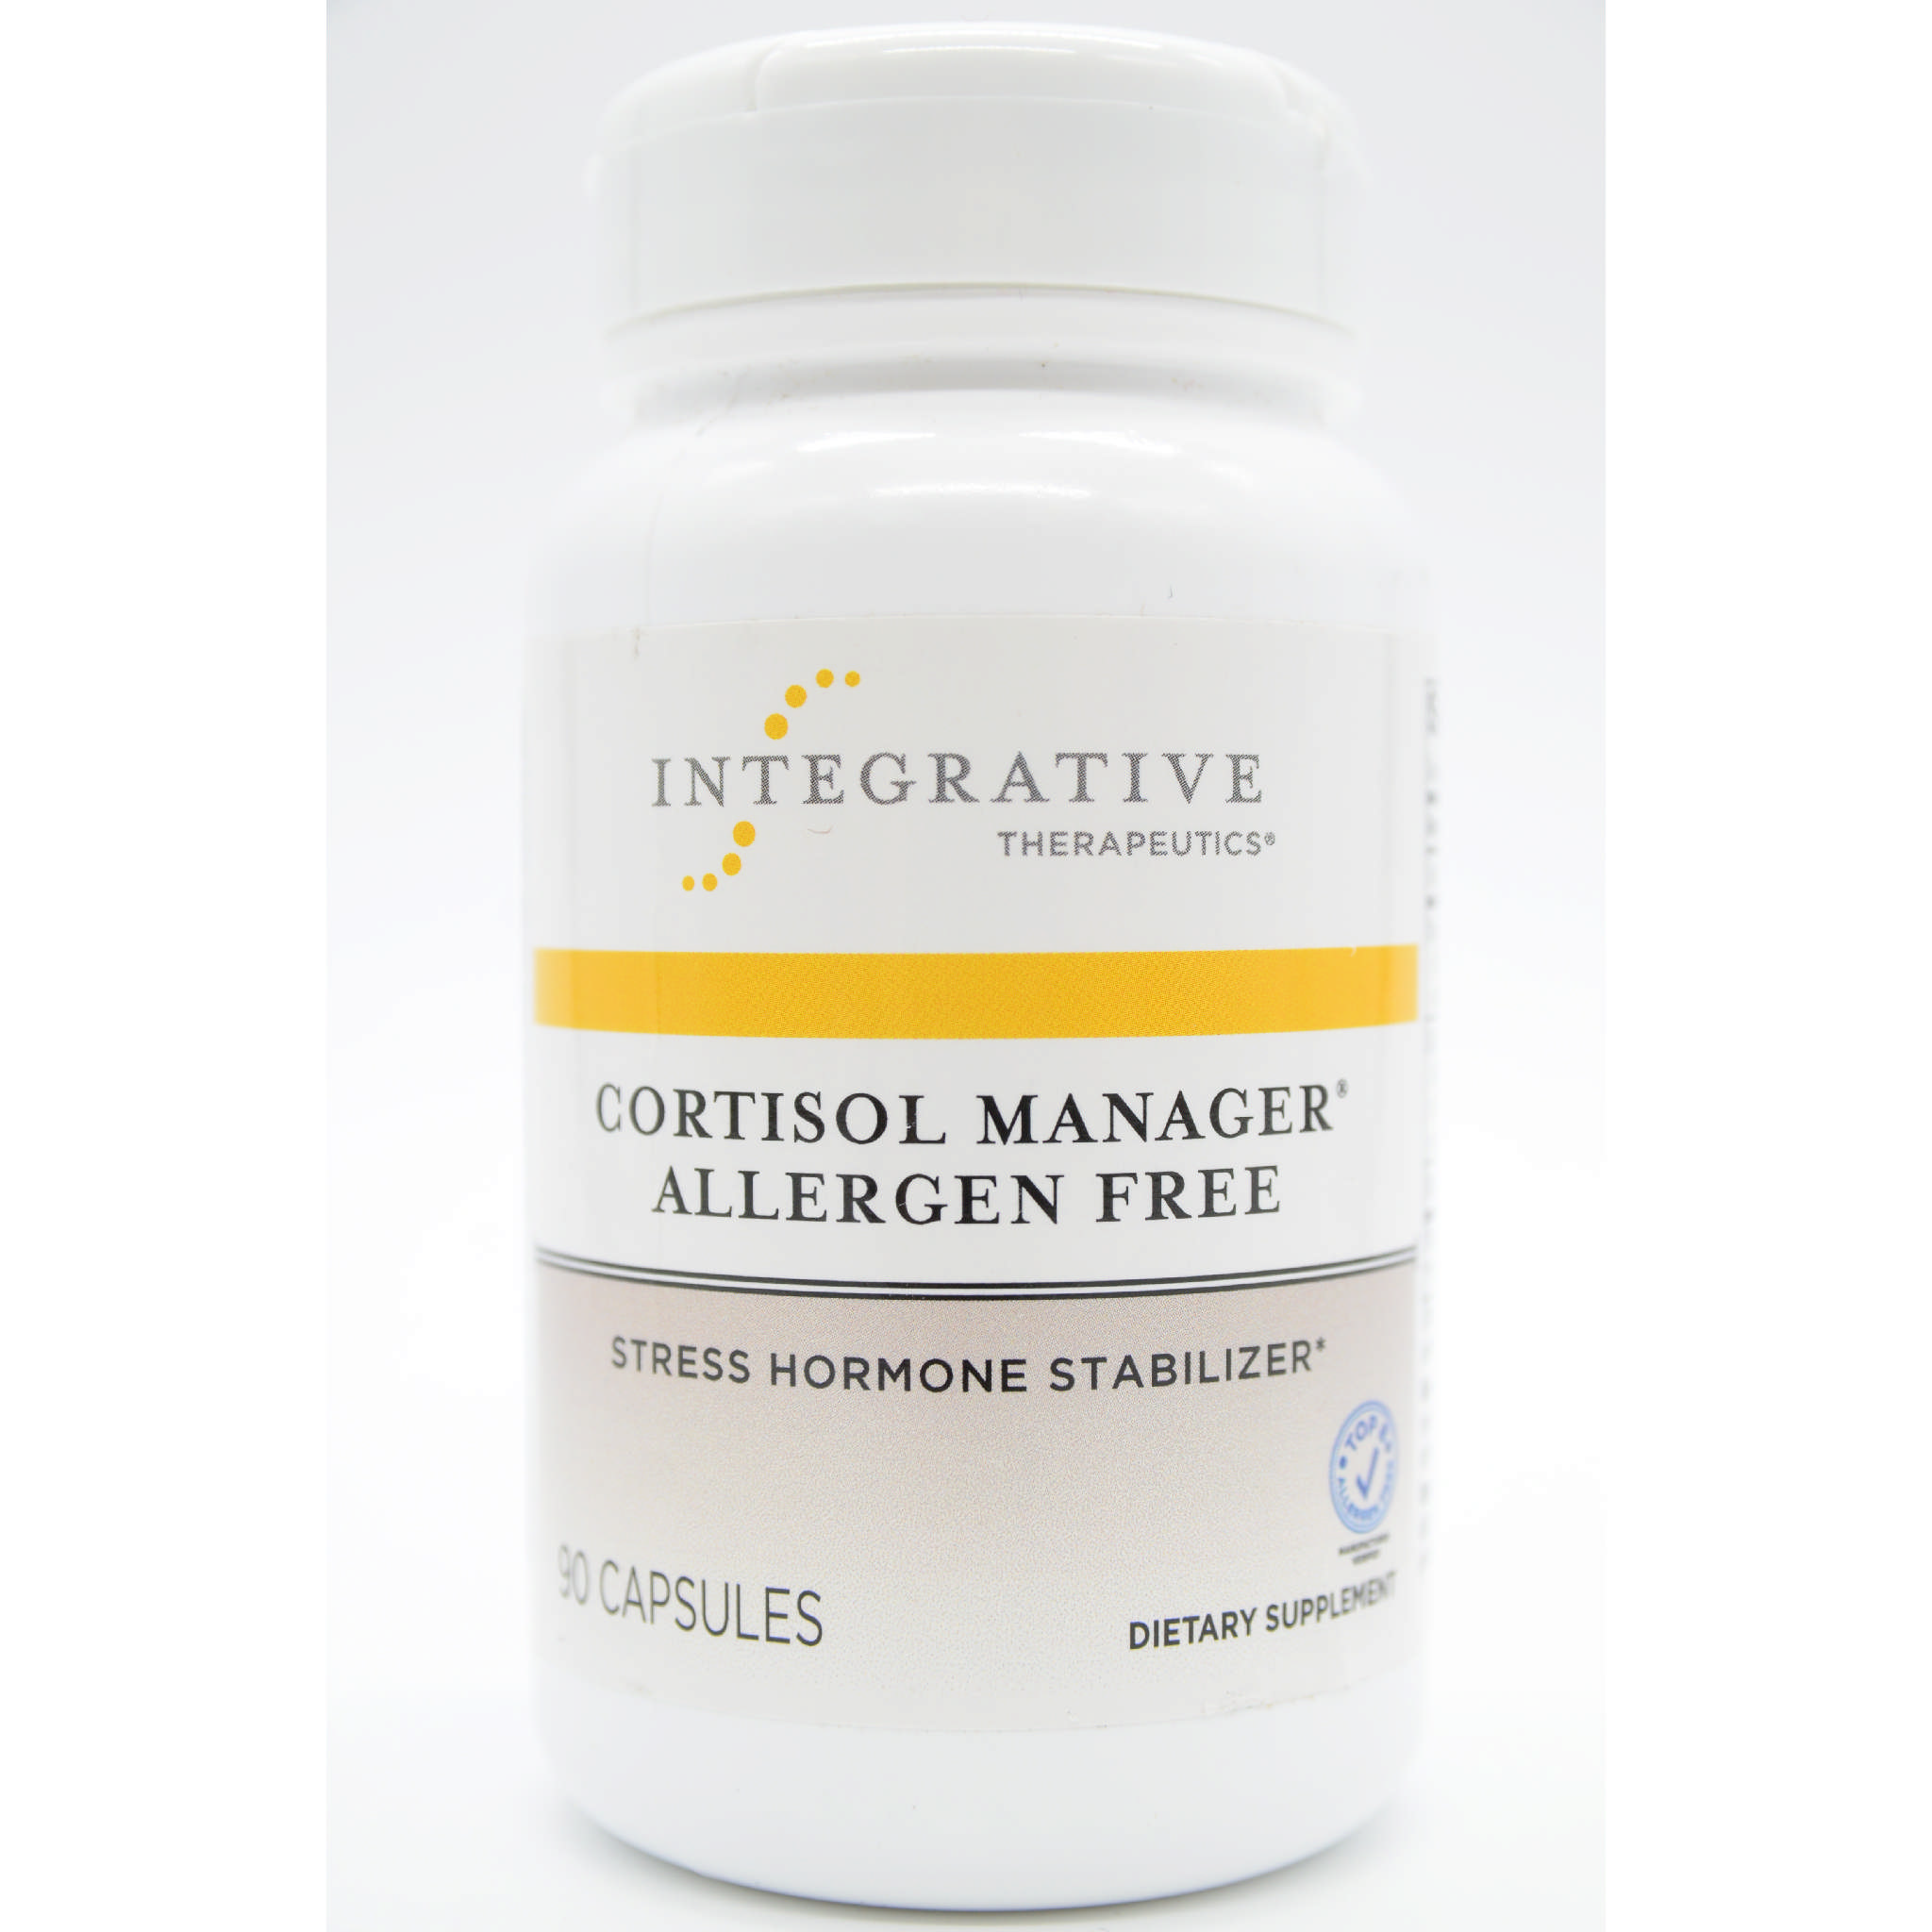 Integrative Therapy - Cortisol Manager Allergen Free